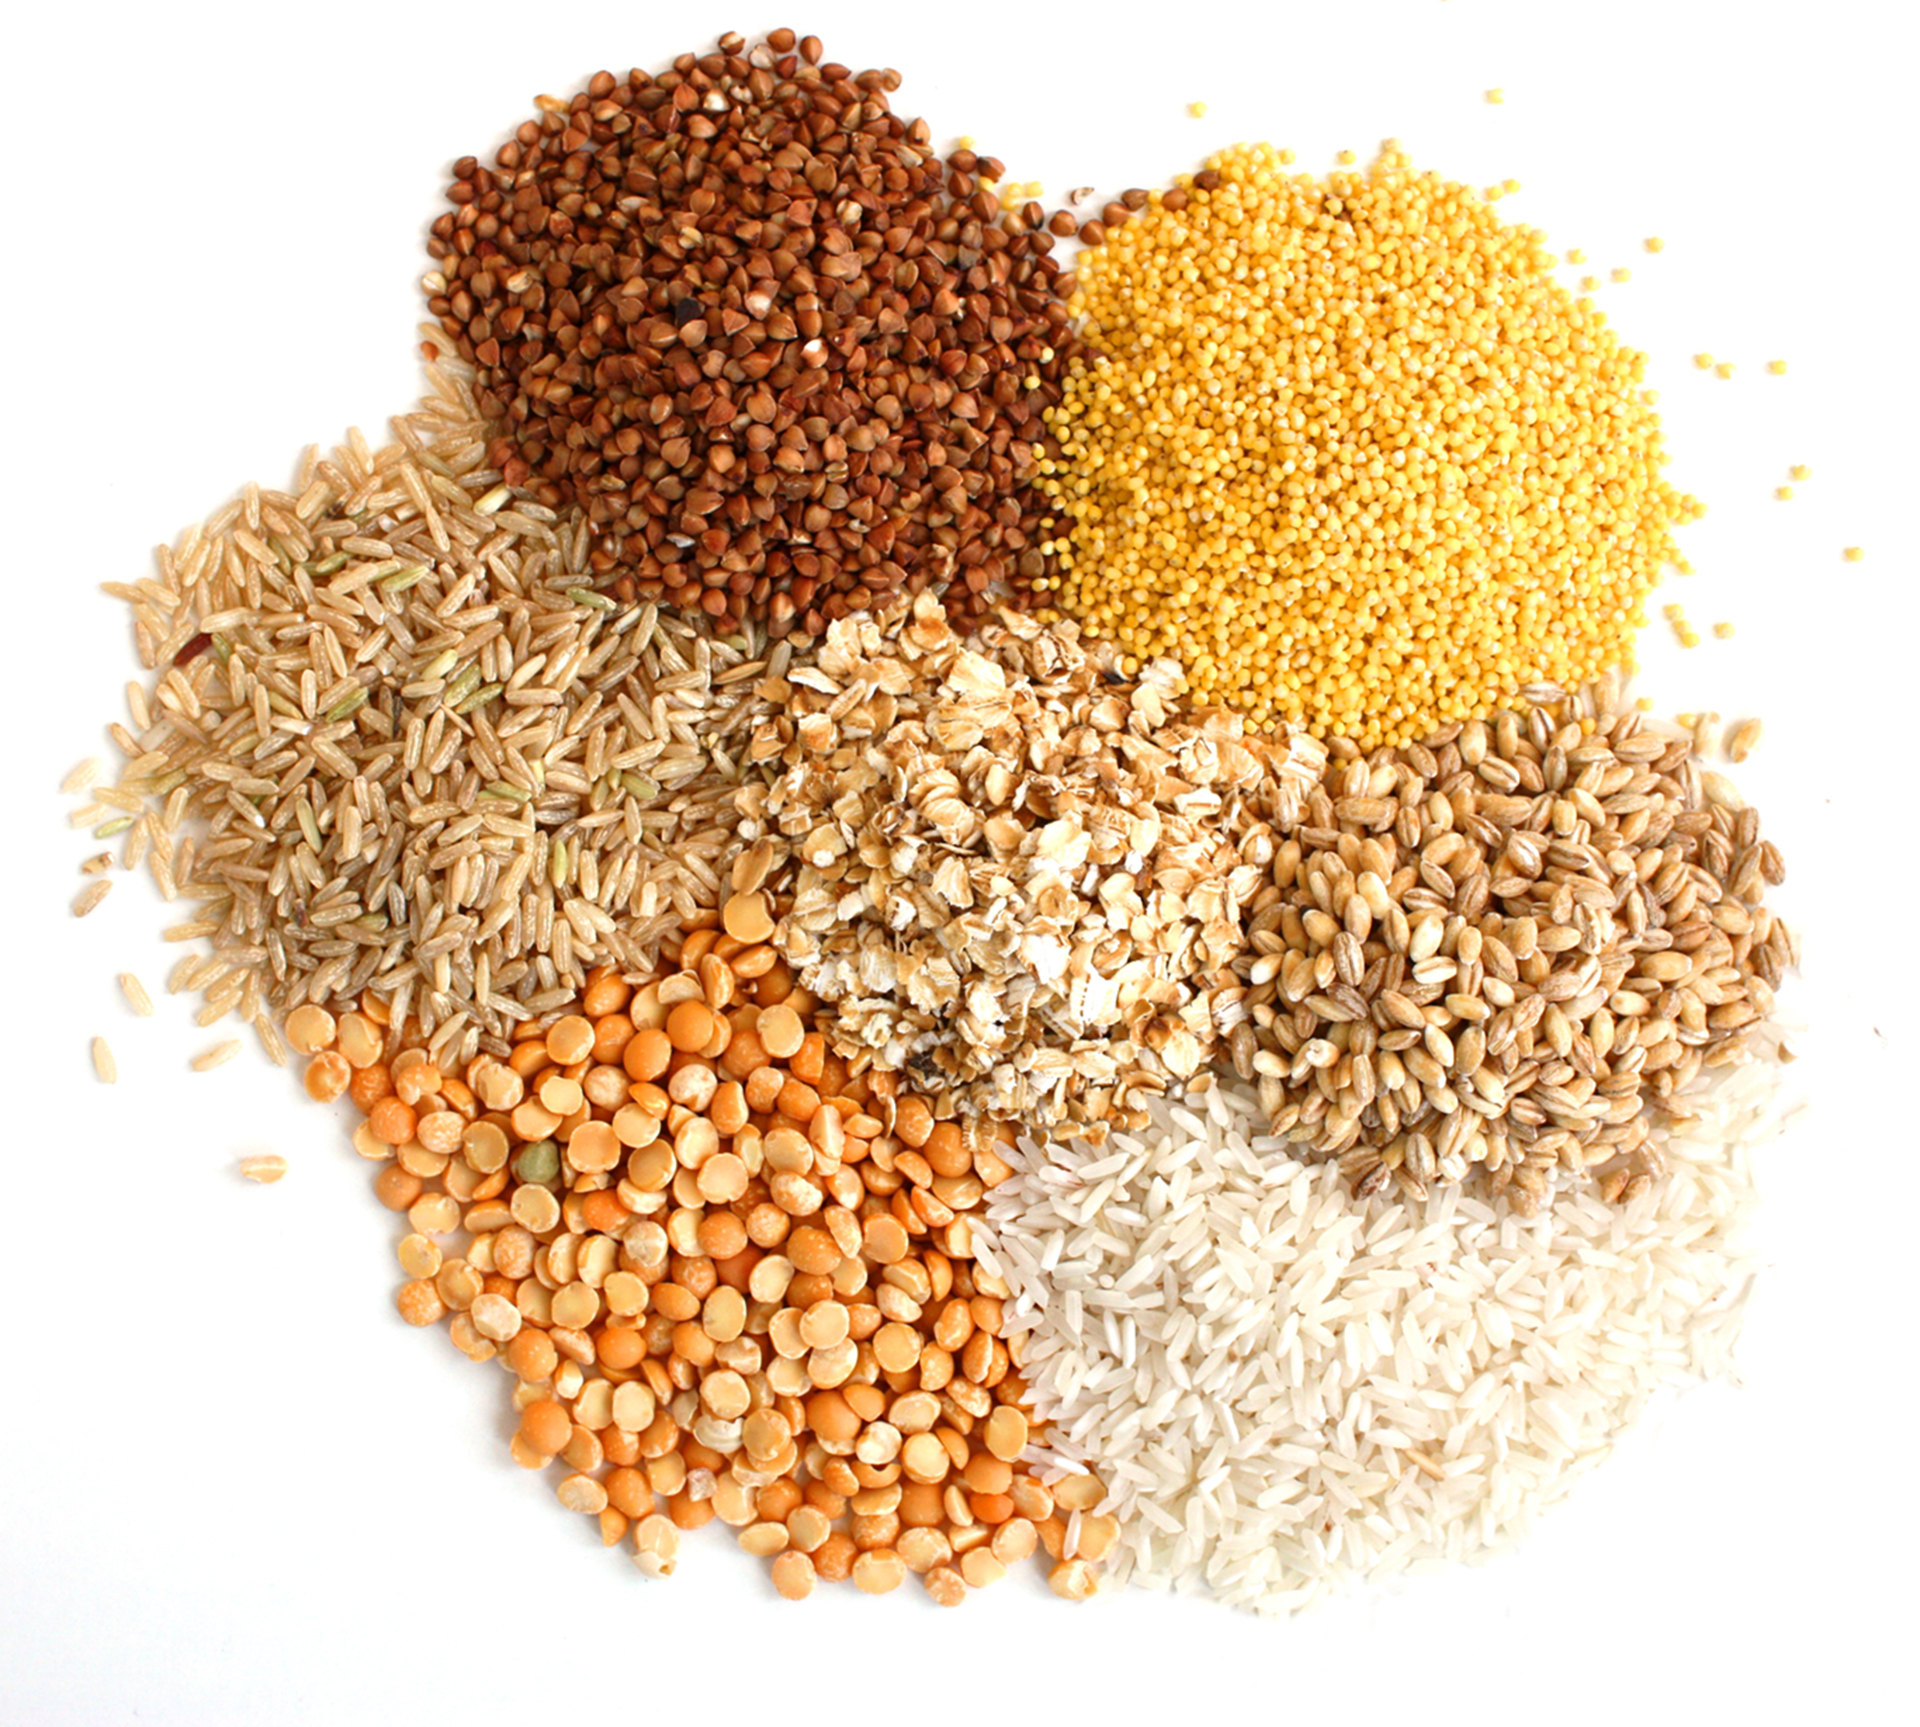 Cereal diversity: oats, wheat, rice